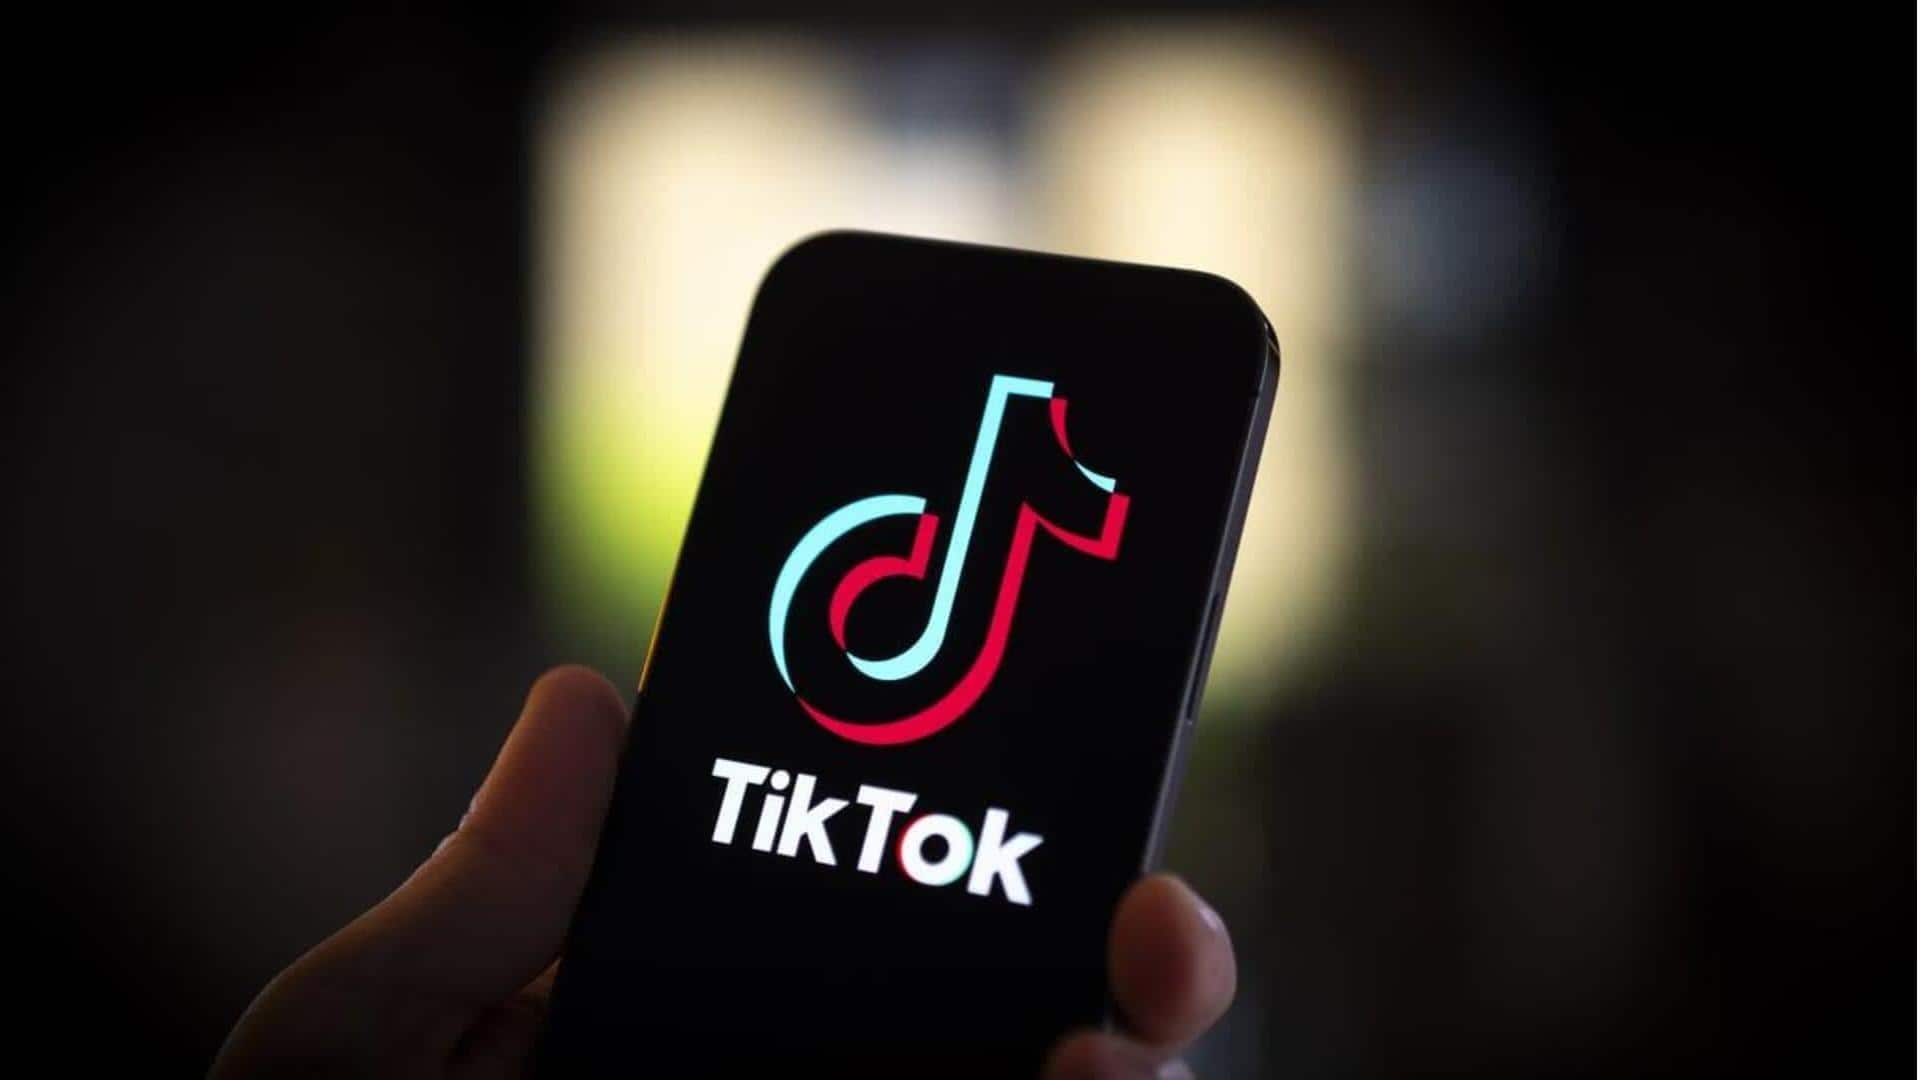 11-year-old dies while attempting TikTok trend 'chroming': What is it?